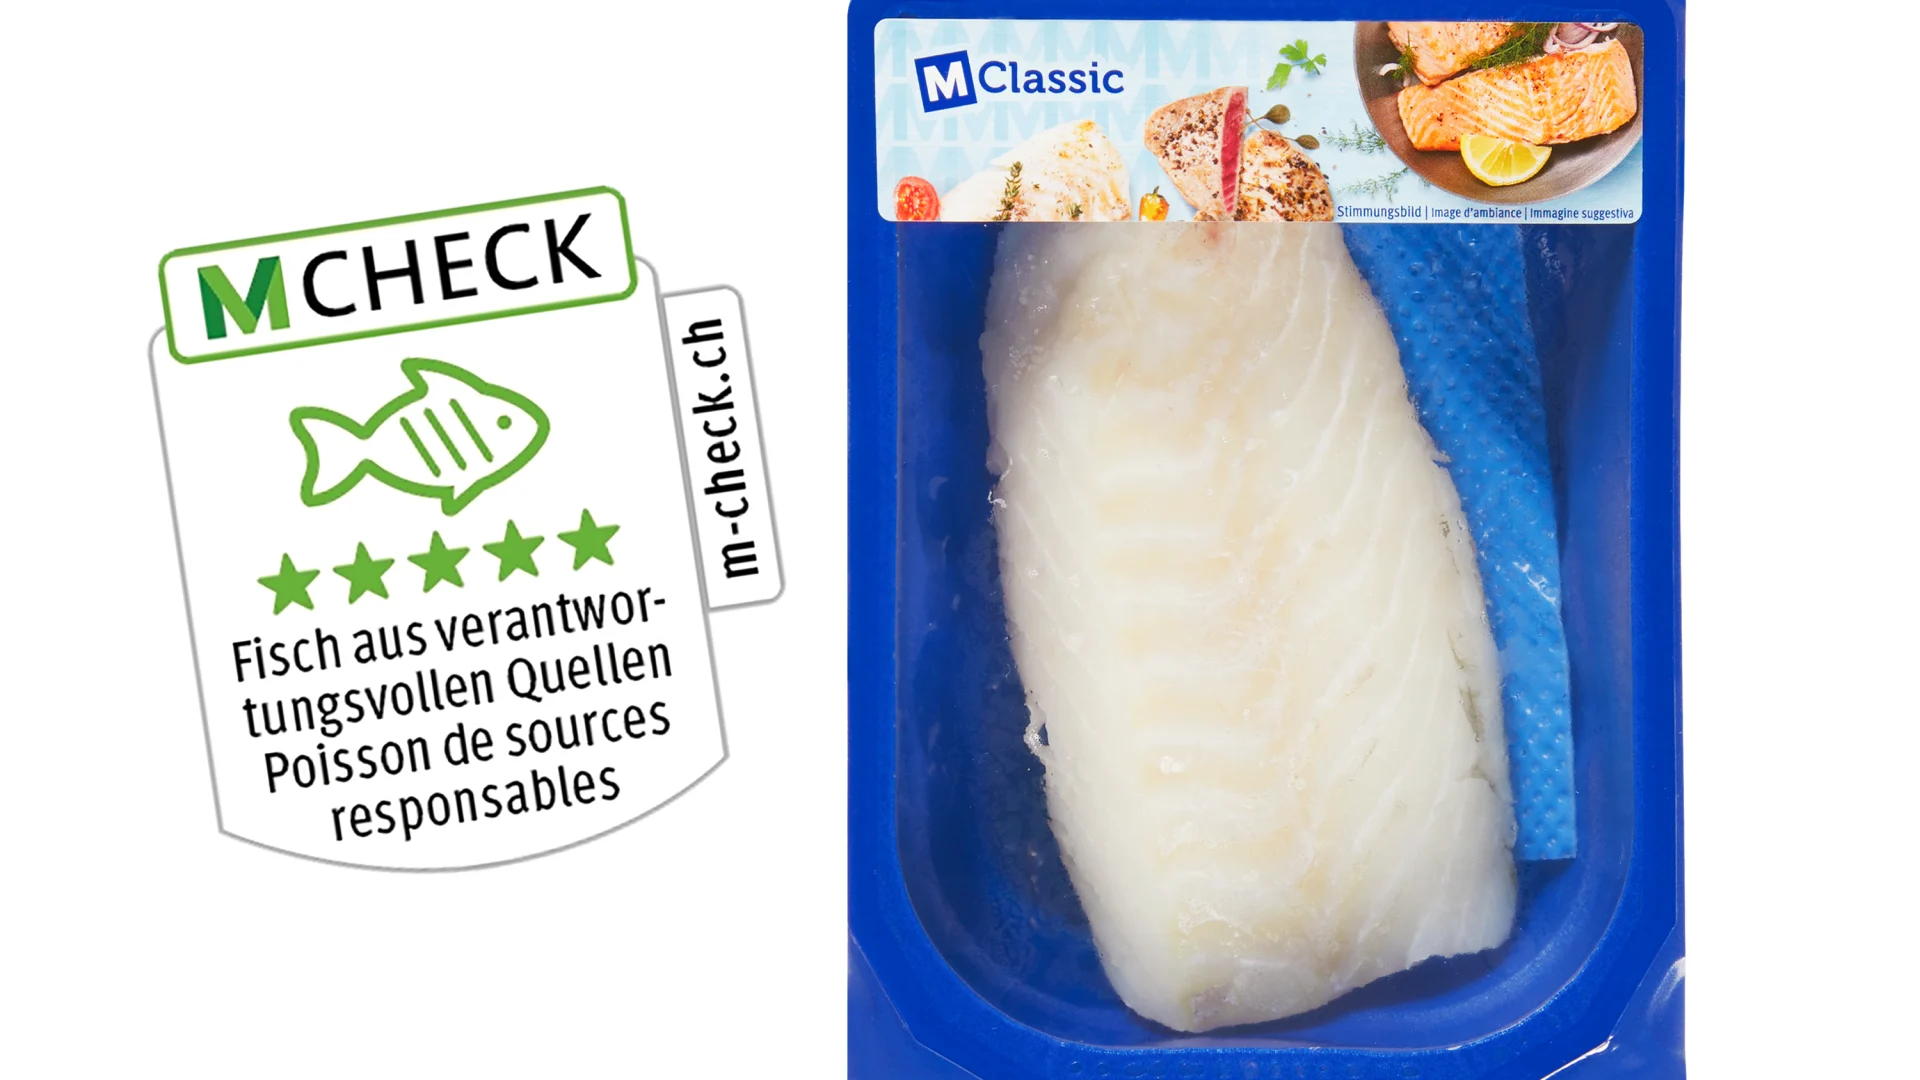 M-Check fish with a rating of five stars.